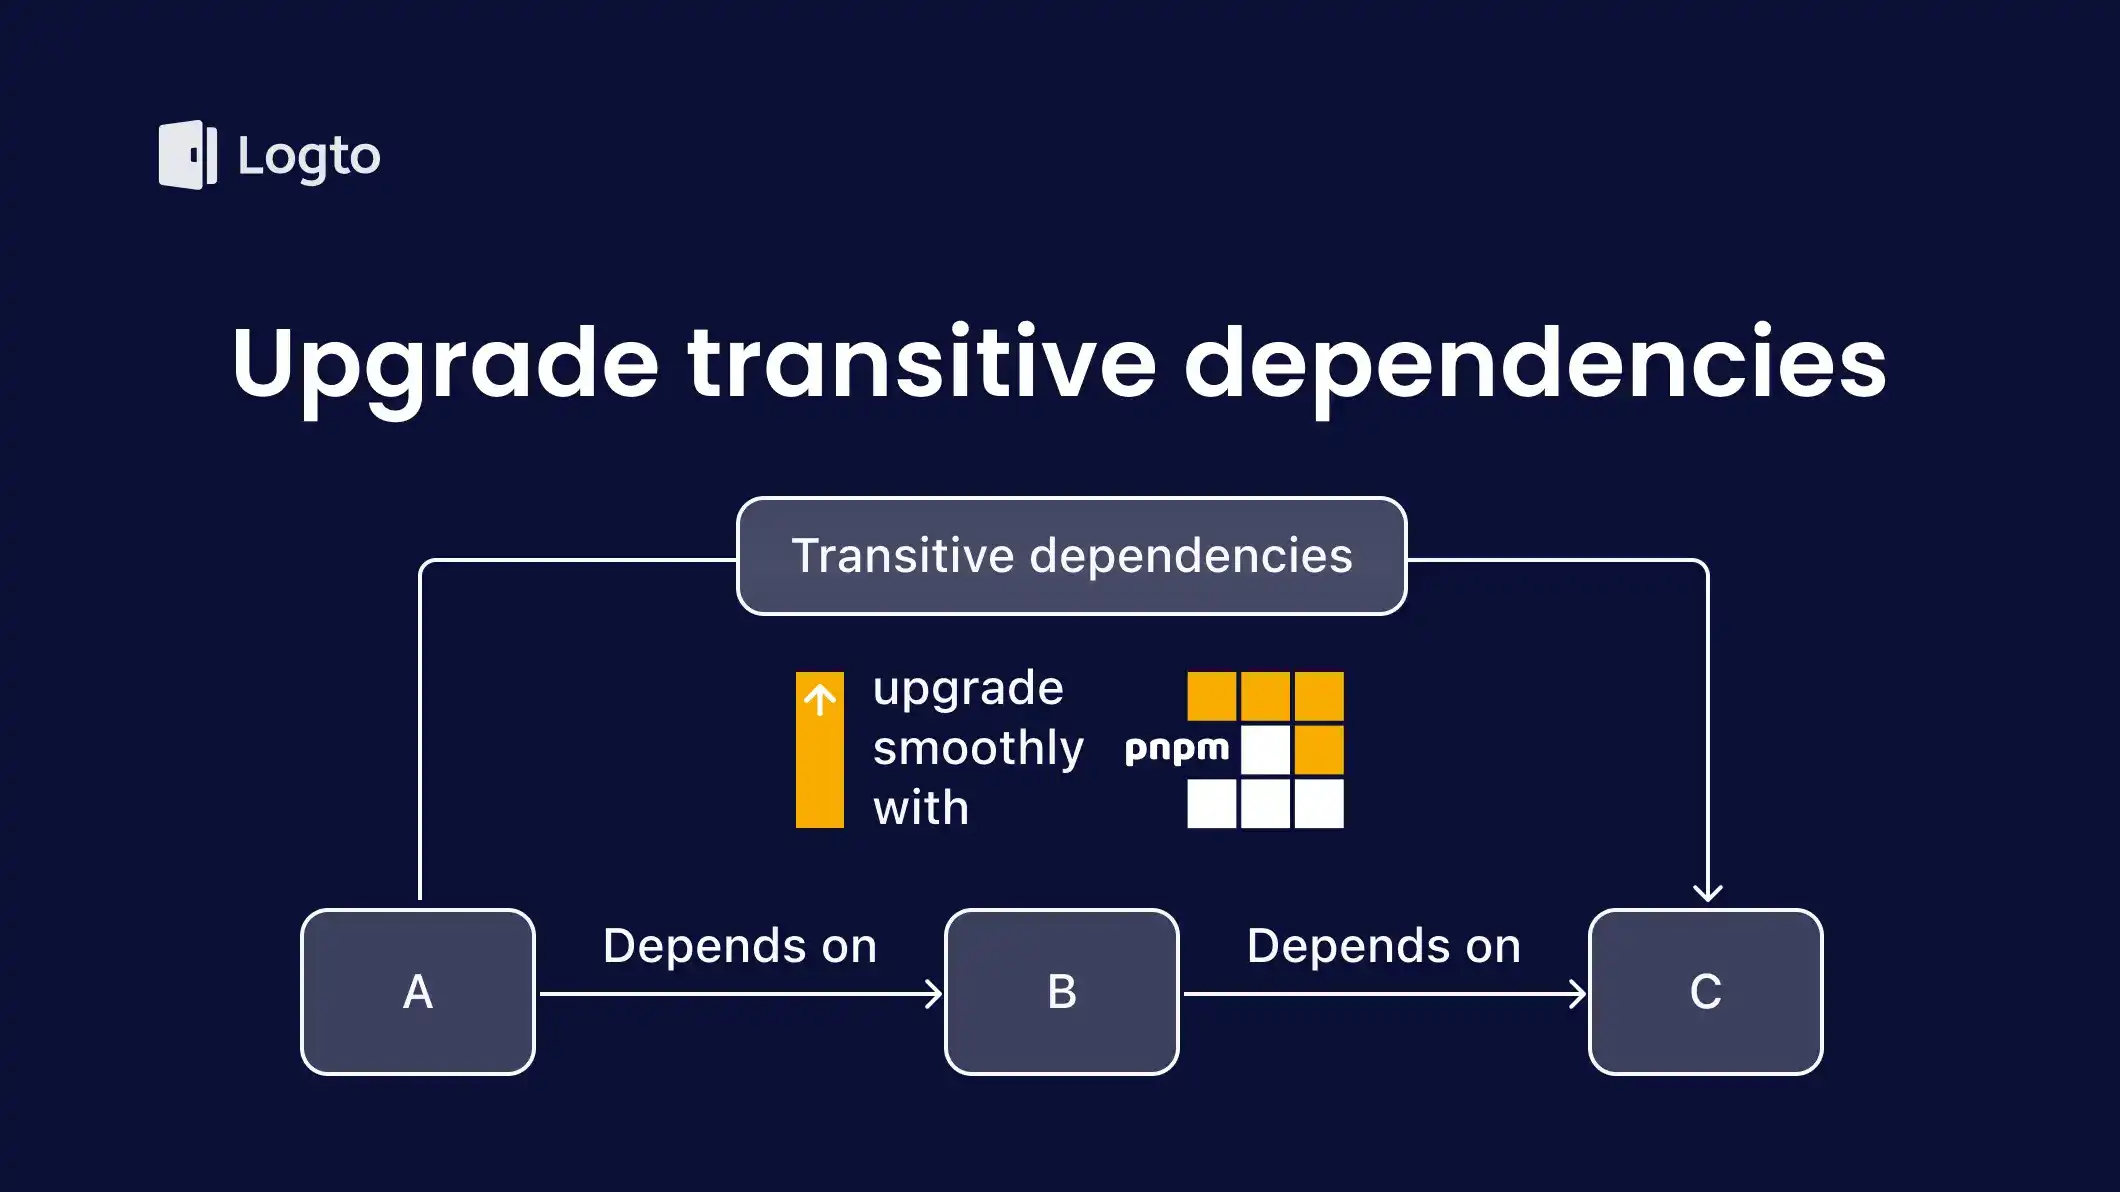 Upgrade transitive dependencies with PNPM: Fix the security vulnerabilities without breaking things